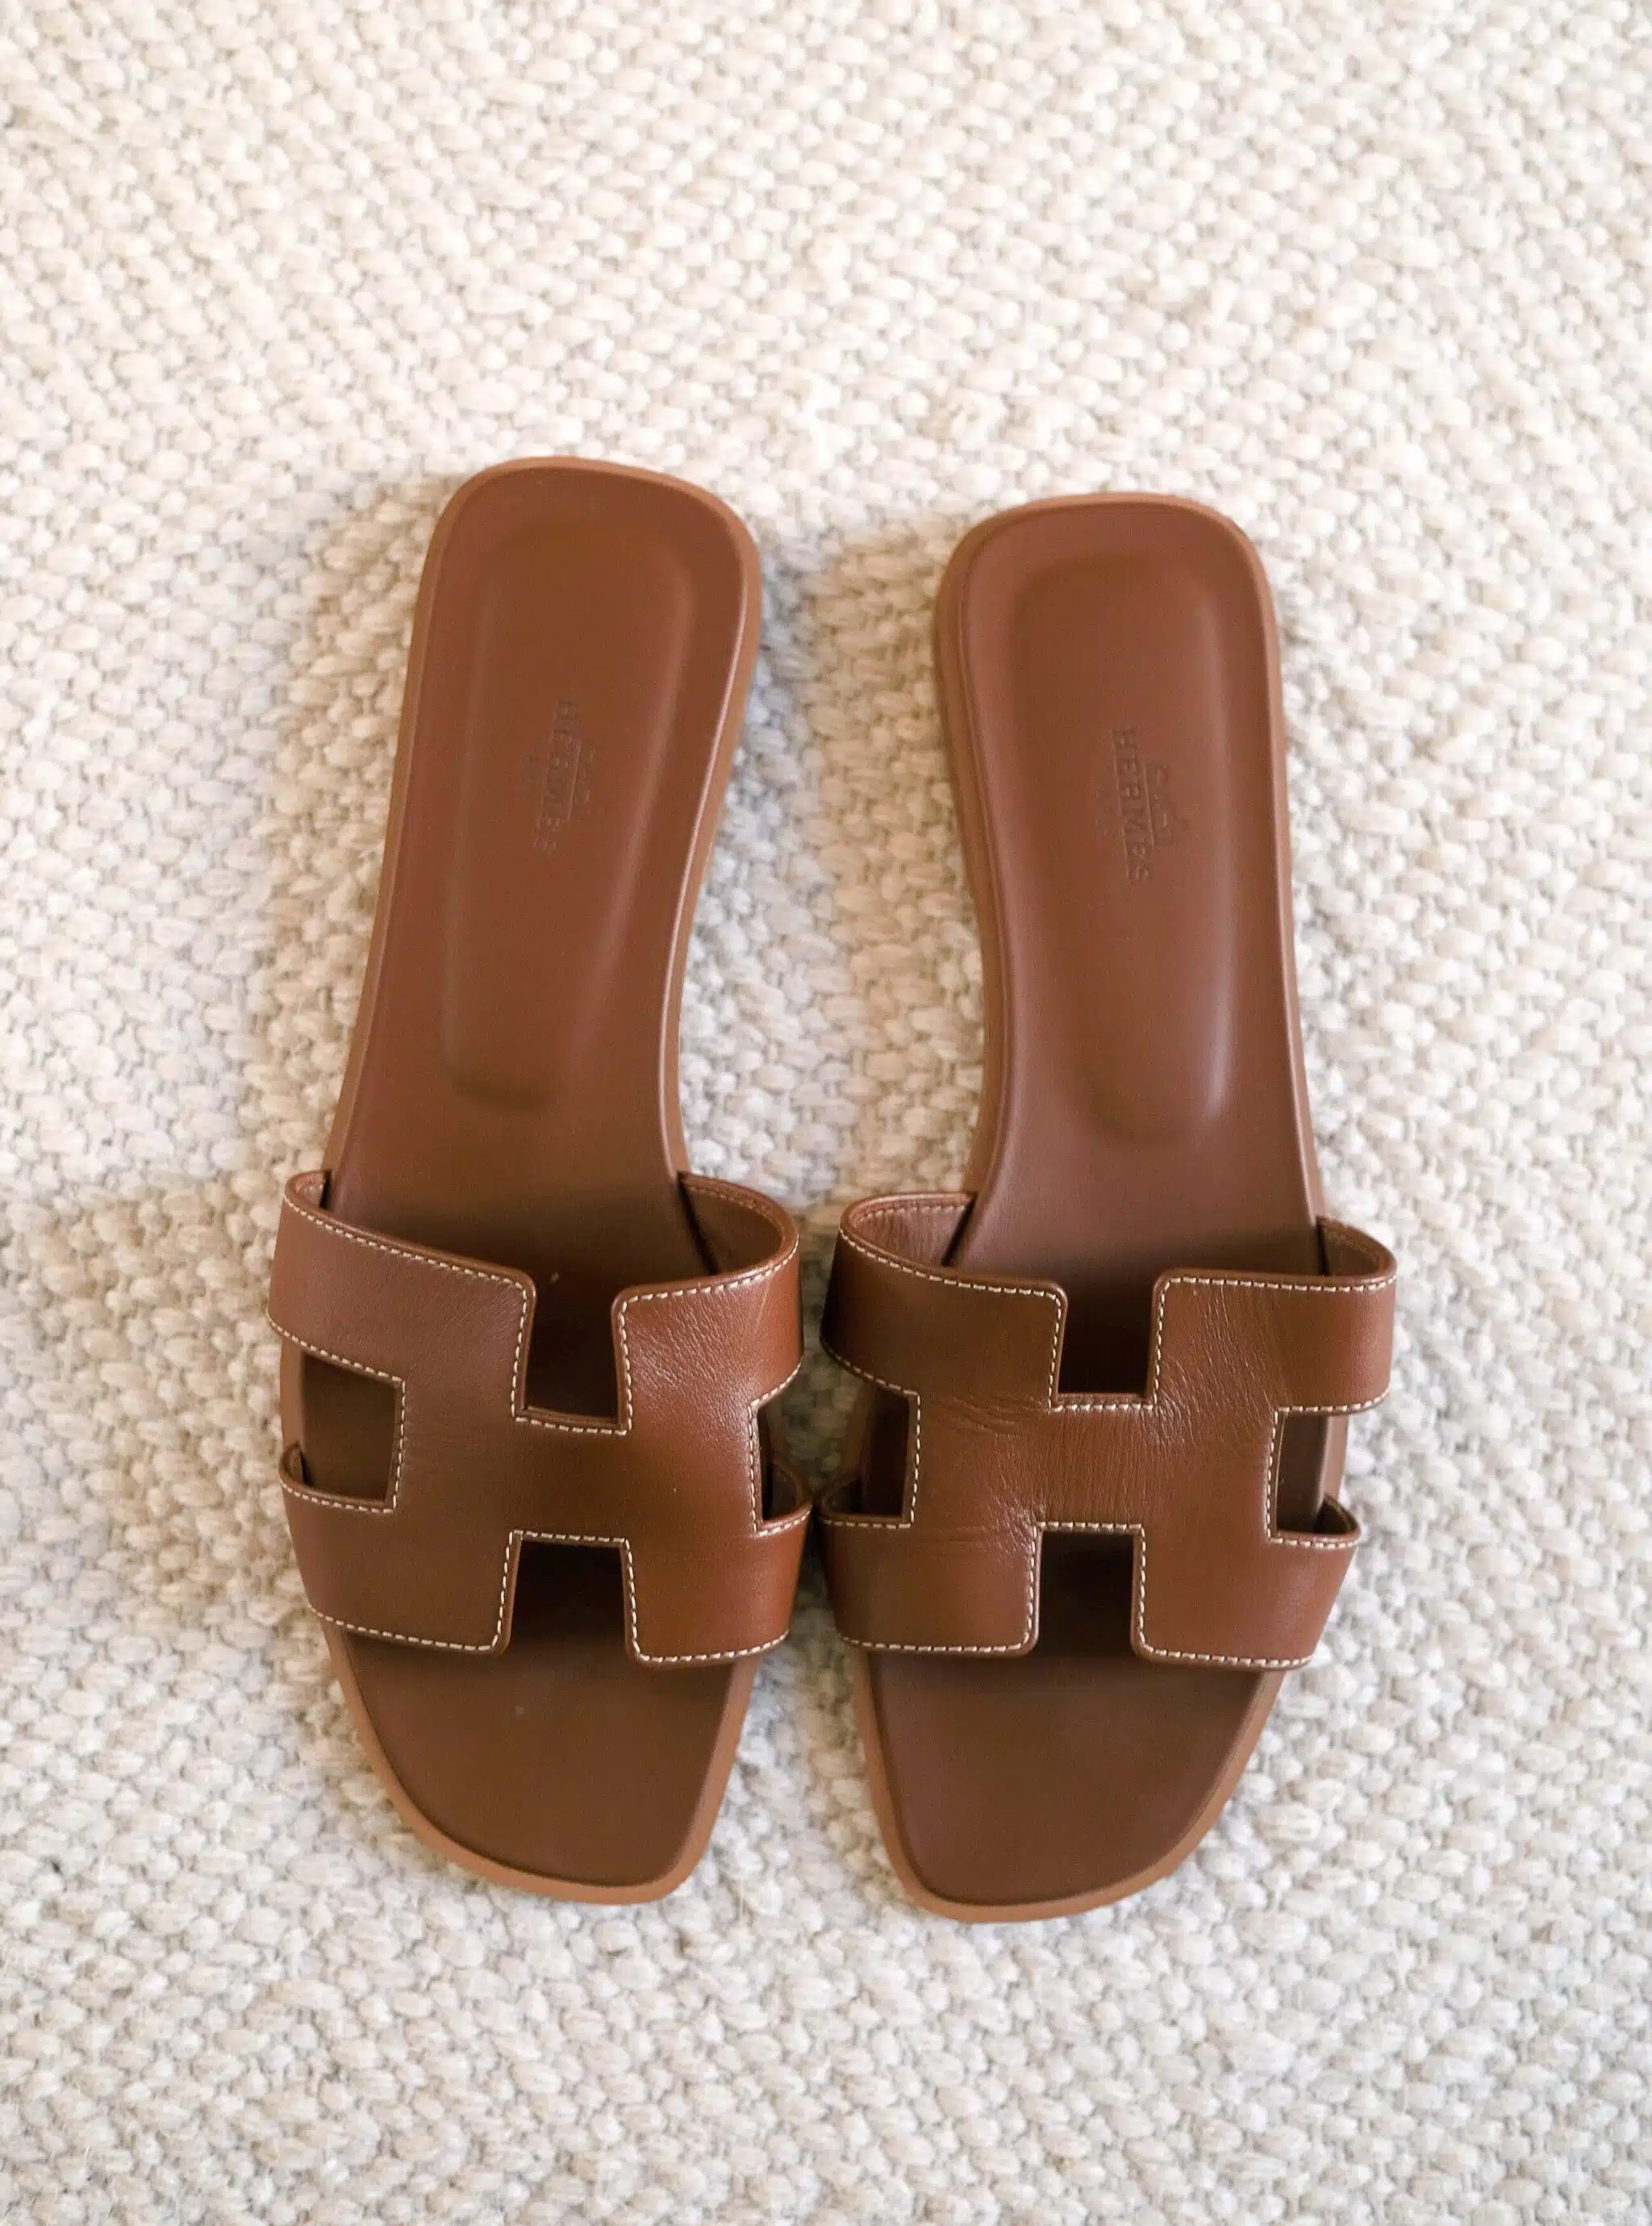 hermes oran sandal review 6 months later